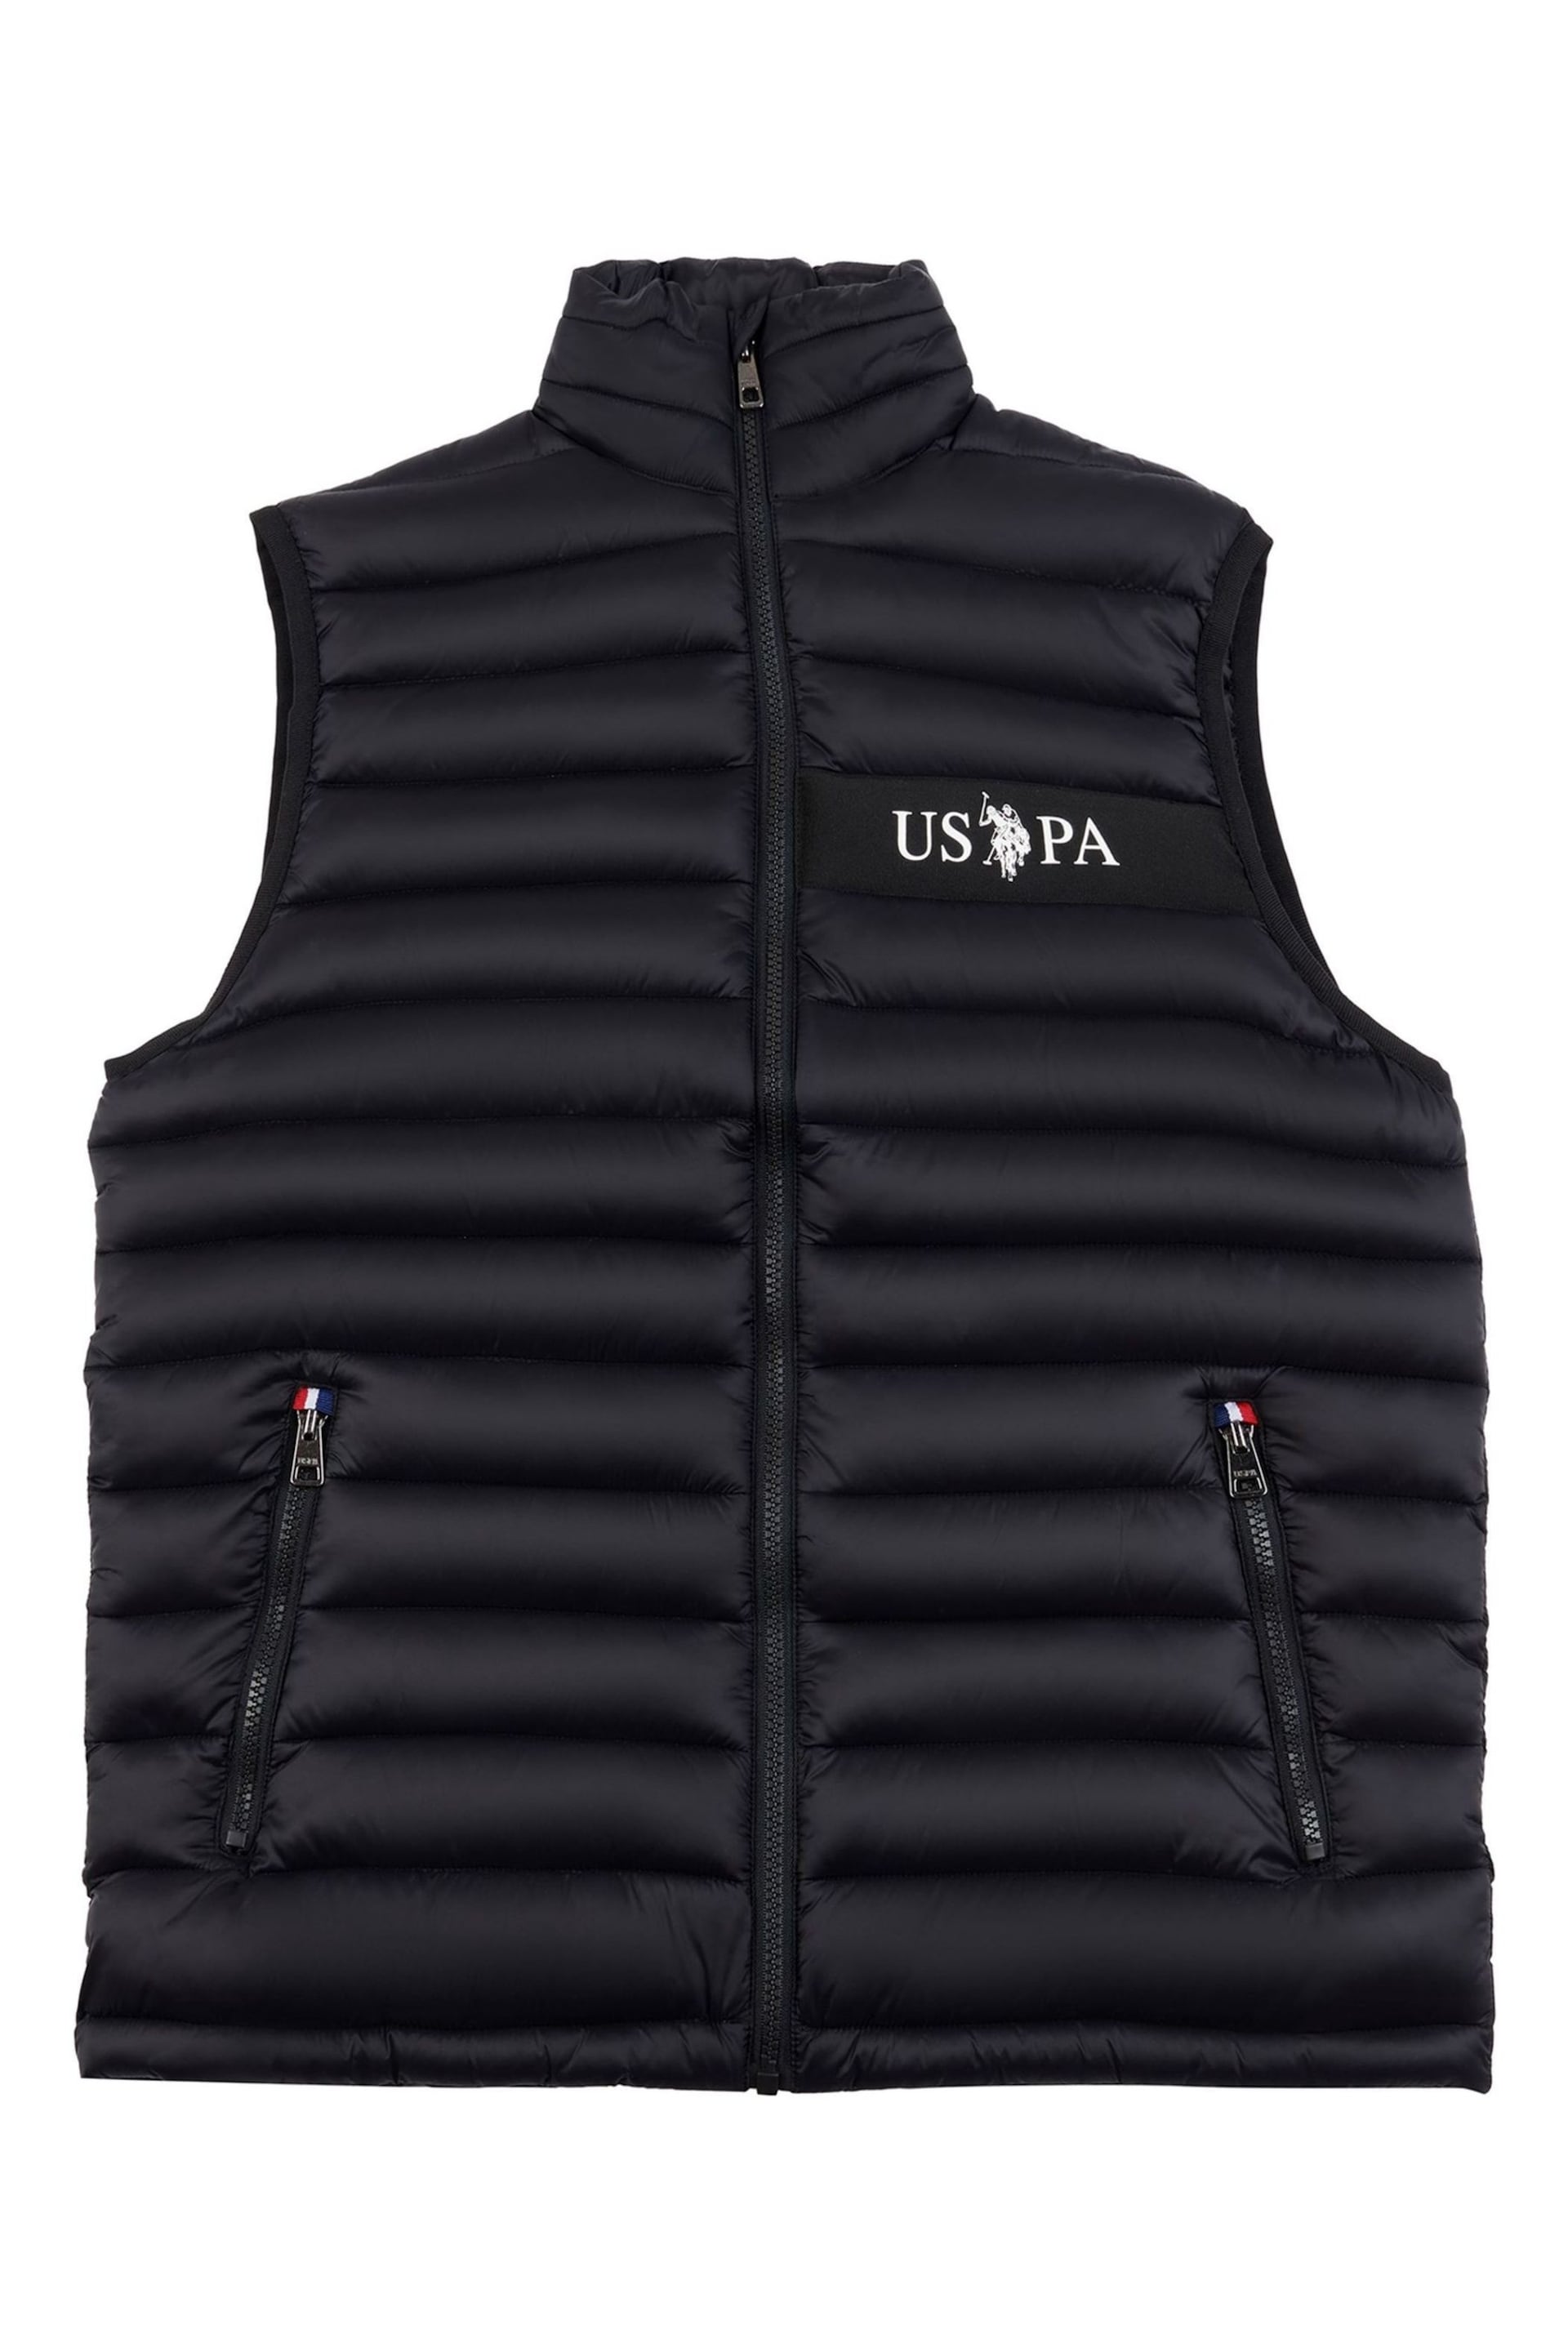 U.S. Polo Assn. Mens Lightweight Quilted Tape Black Gilet - Image 5 of 7